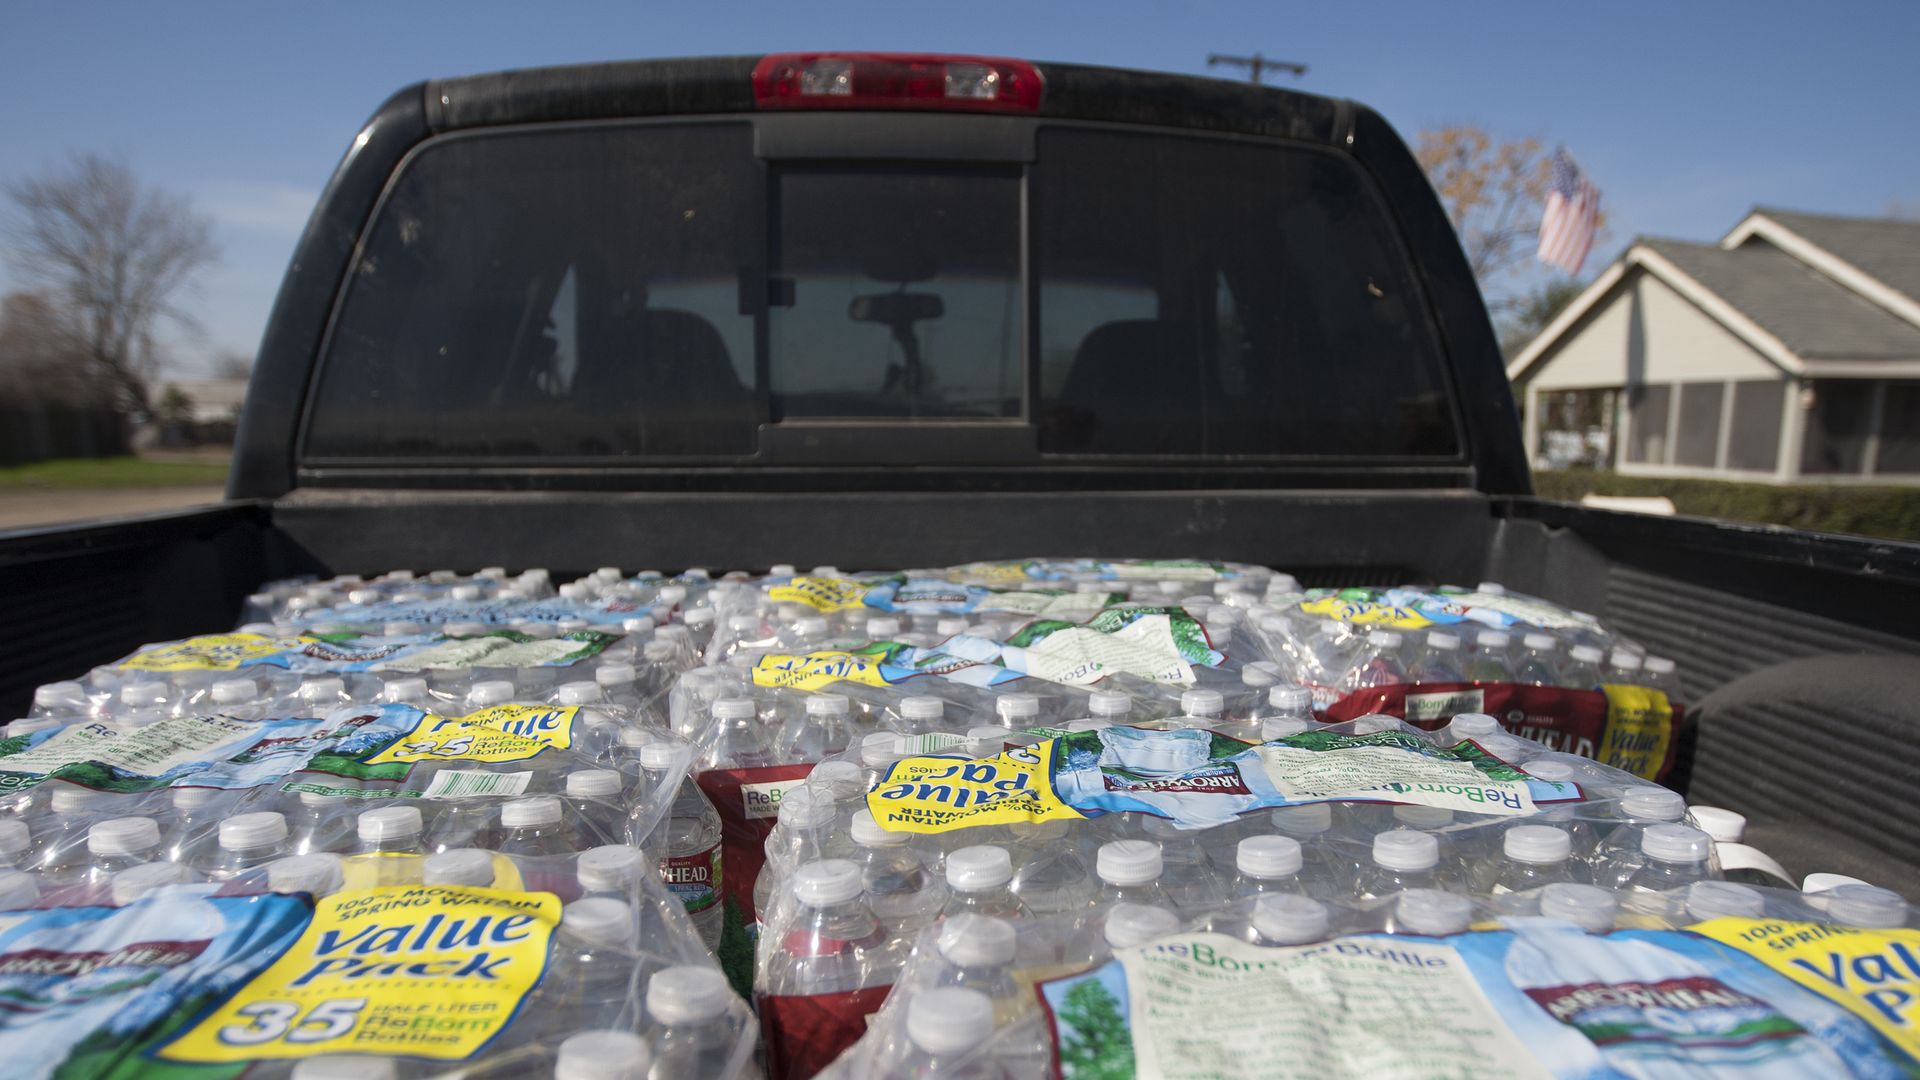 Cases of bottled water in a truck bed. 